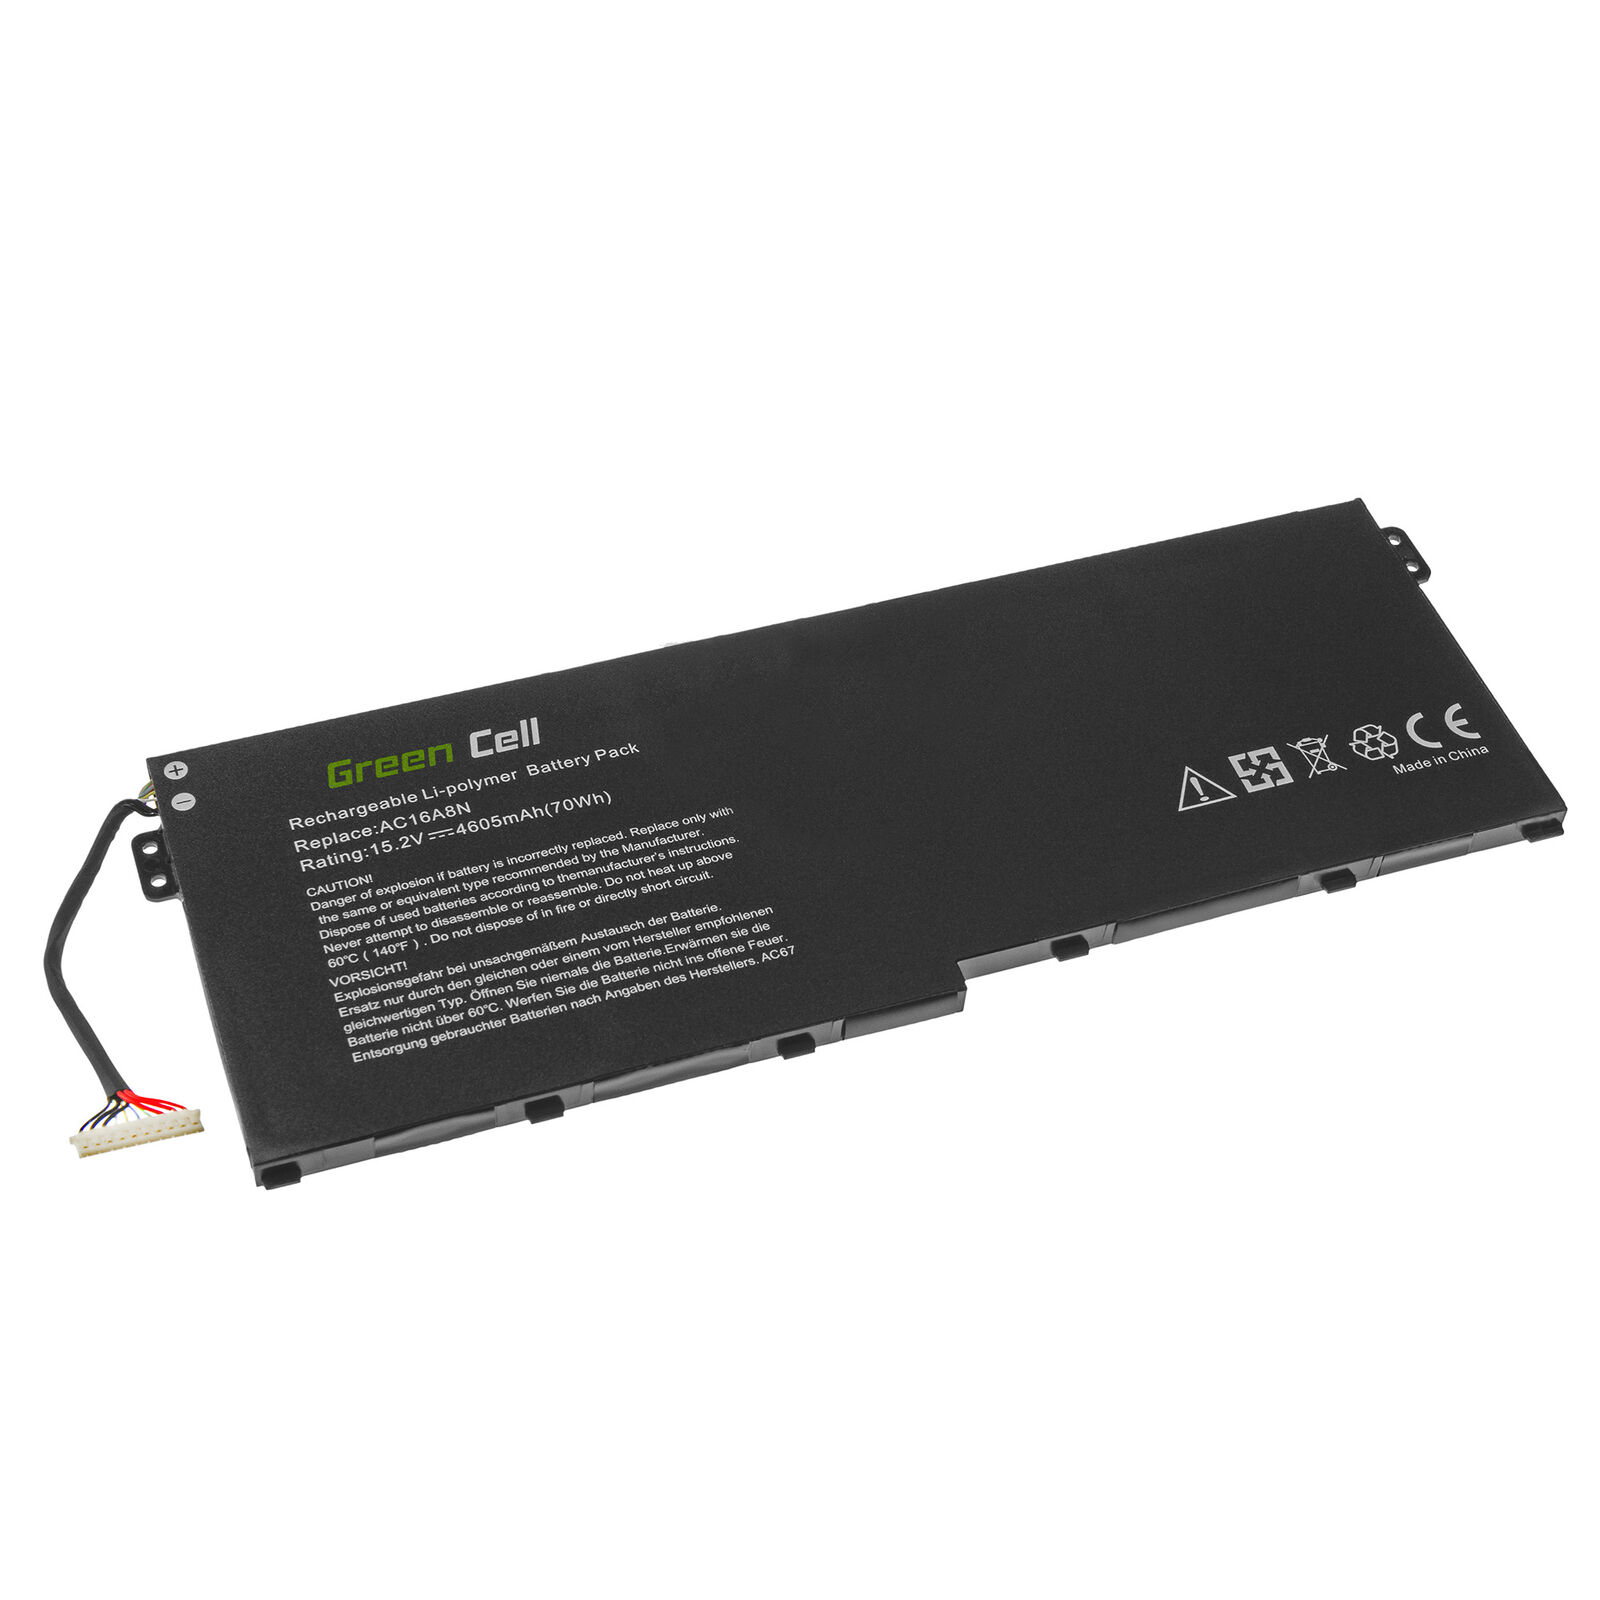 Accu voor 15.2V AC16A8N Acer Aspire V15 V17 Nitro BE VN7-593G VN7-793G(compatible)